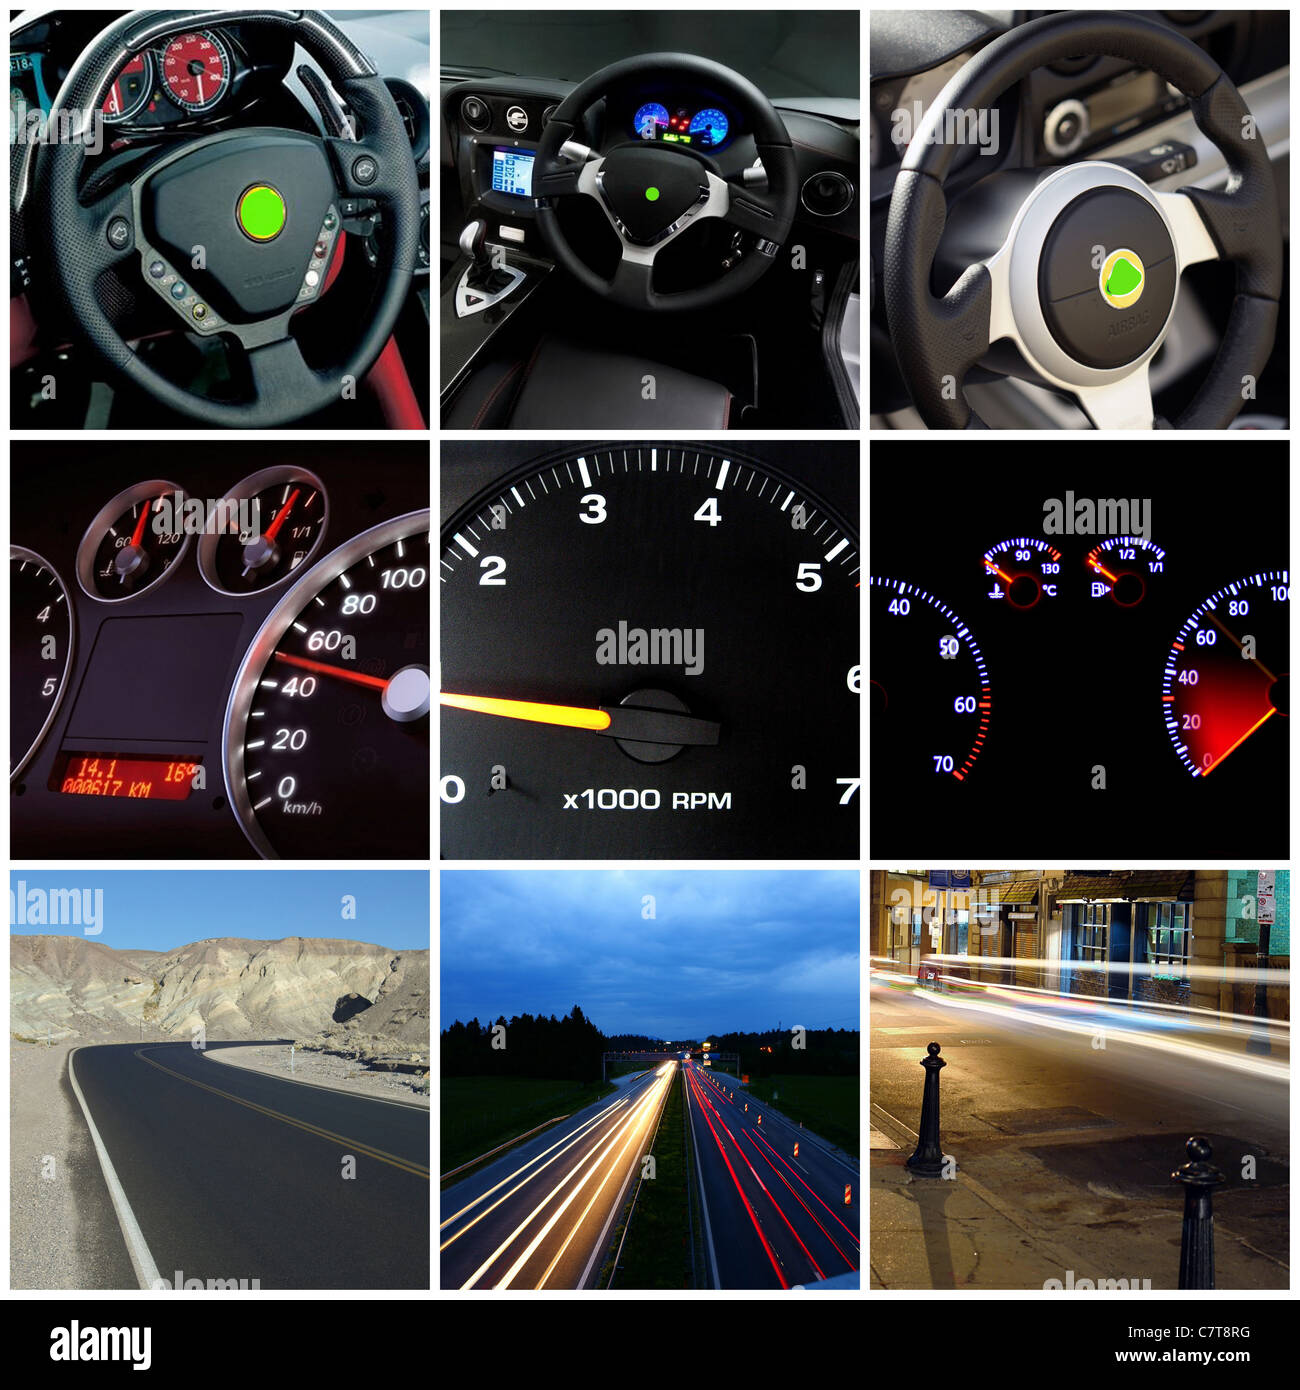 Collage various photos of a Speed autobahn highway. Stock Photo